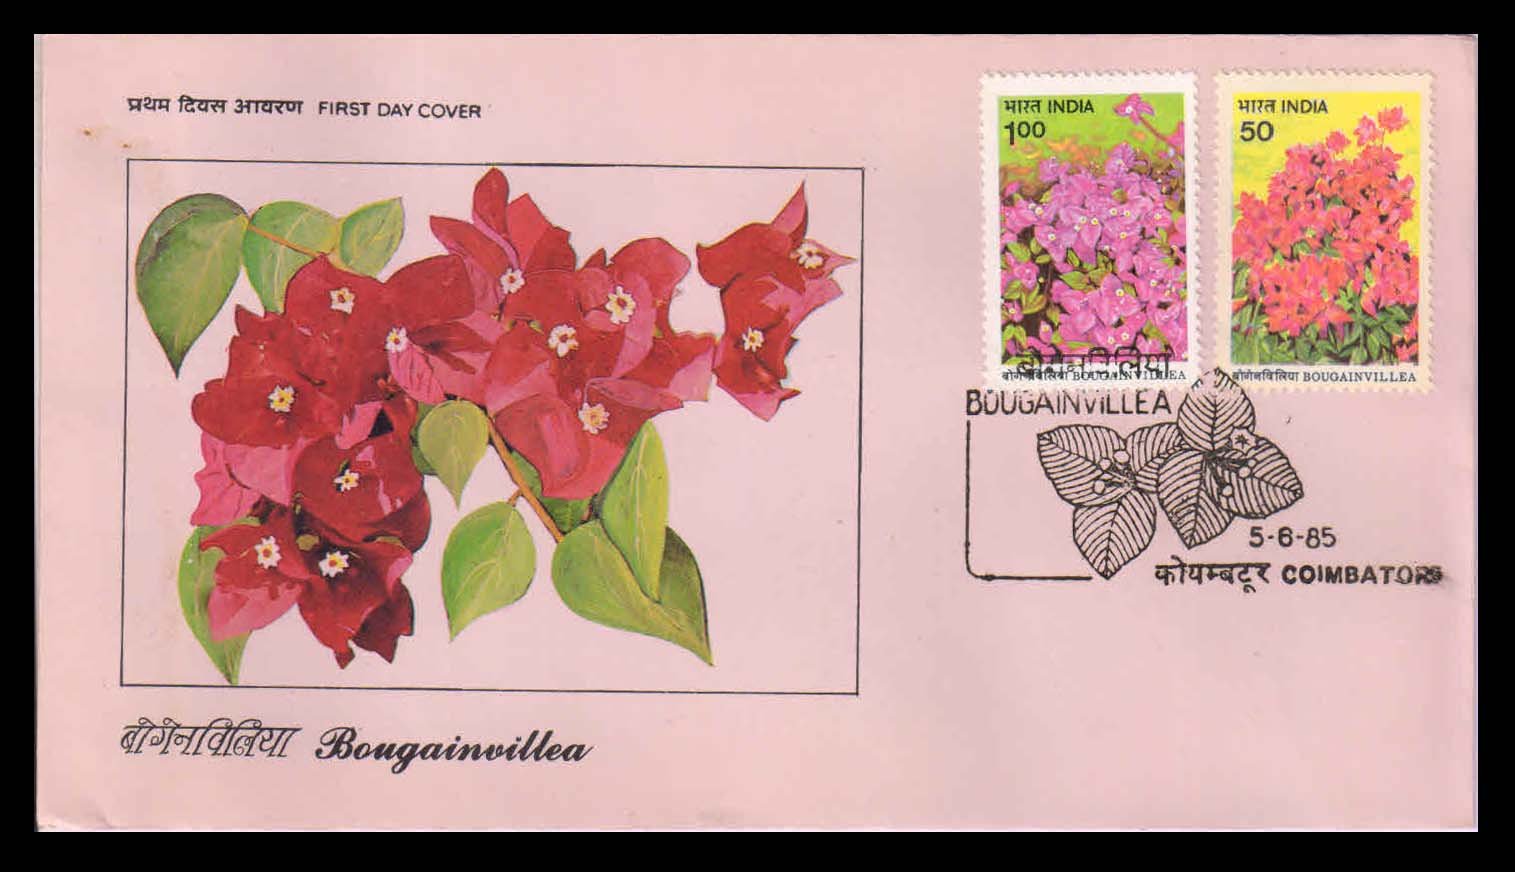 India 5-6-1985, Bougainvillea Flowers, Set of 2 Stamps on First Day Cover